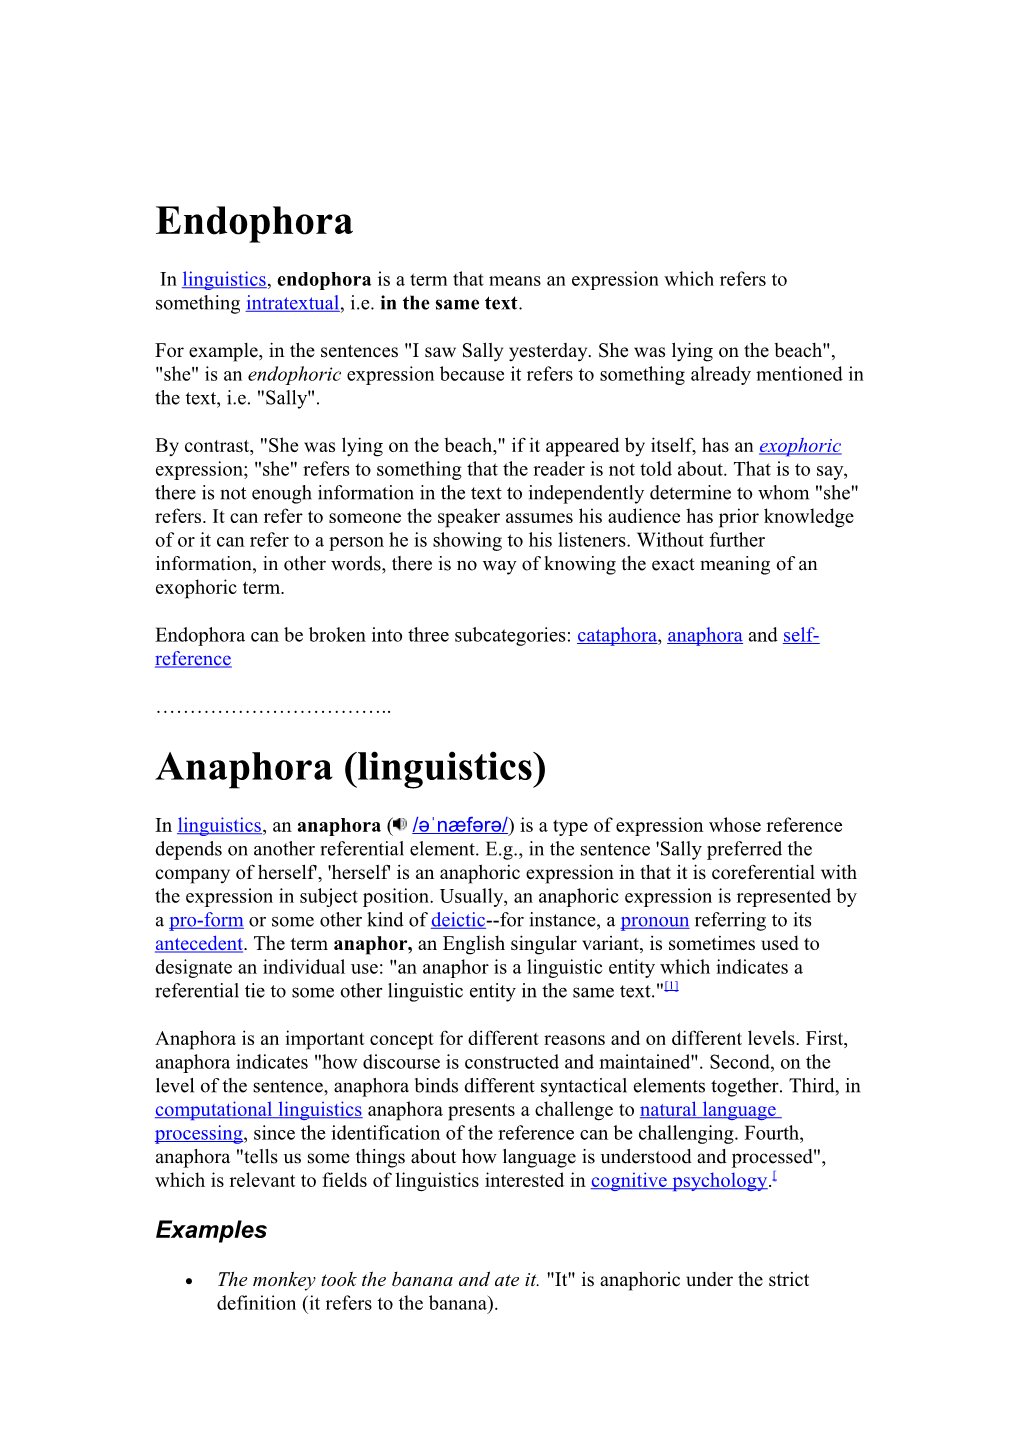 In Linguistics, Endophora Is a Term That Means an Expression Which Refers to Something